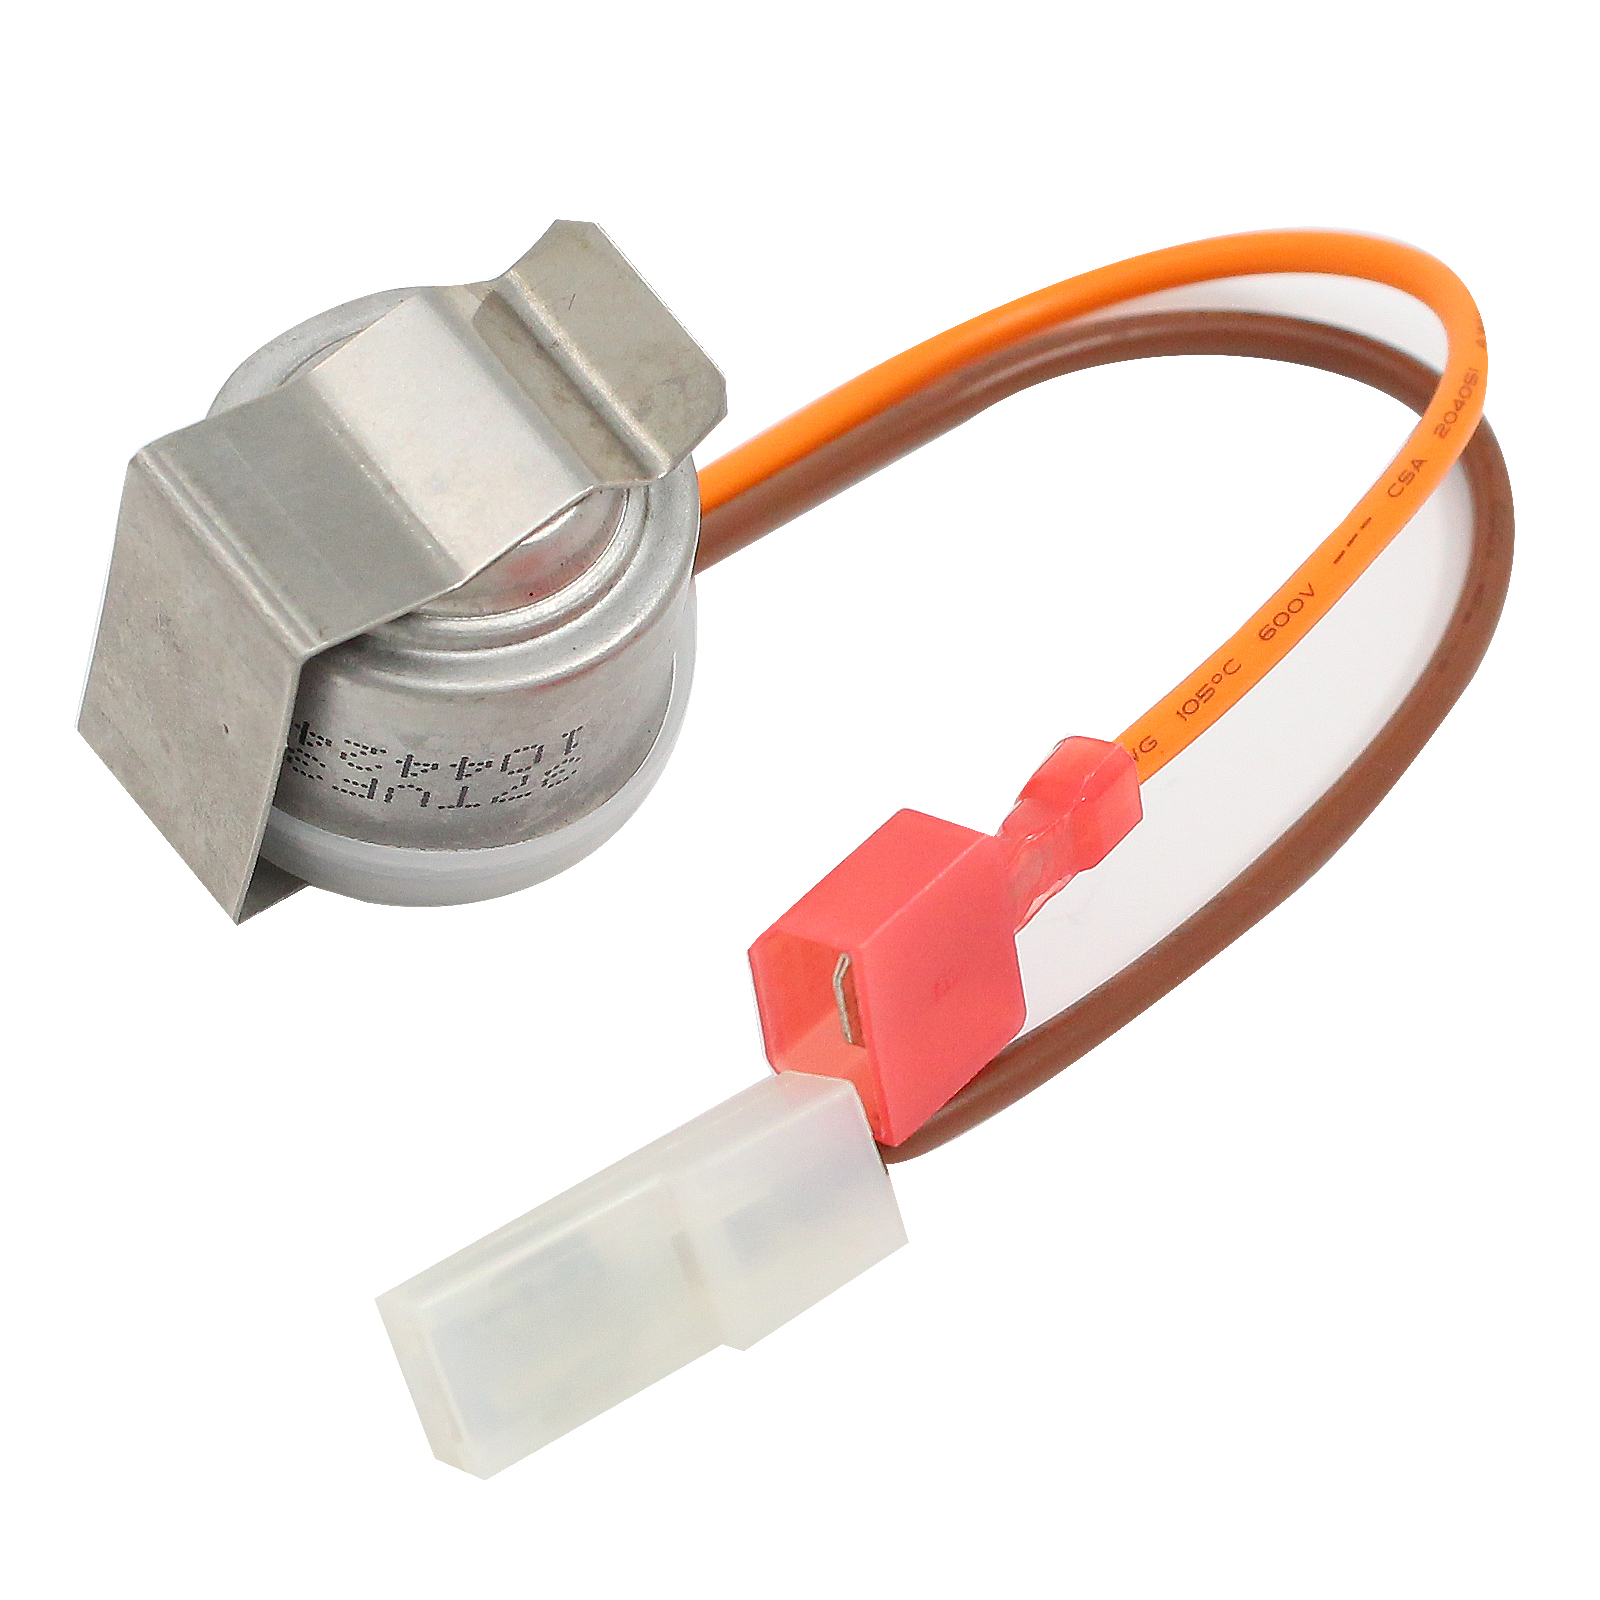 WP10442411 Refrigerator Defrost Thermostat Replacement for Amana BX21V1W (P1325028W W) Refrigerator - Compatible with 10442411 Defrost Thermostat - image 2 of 4